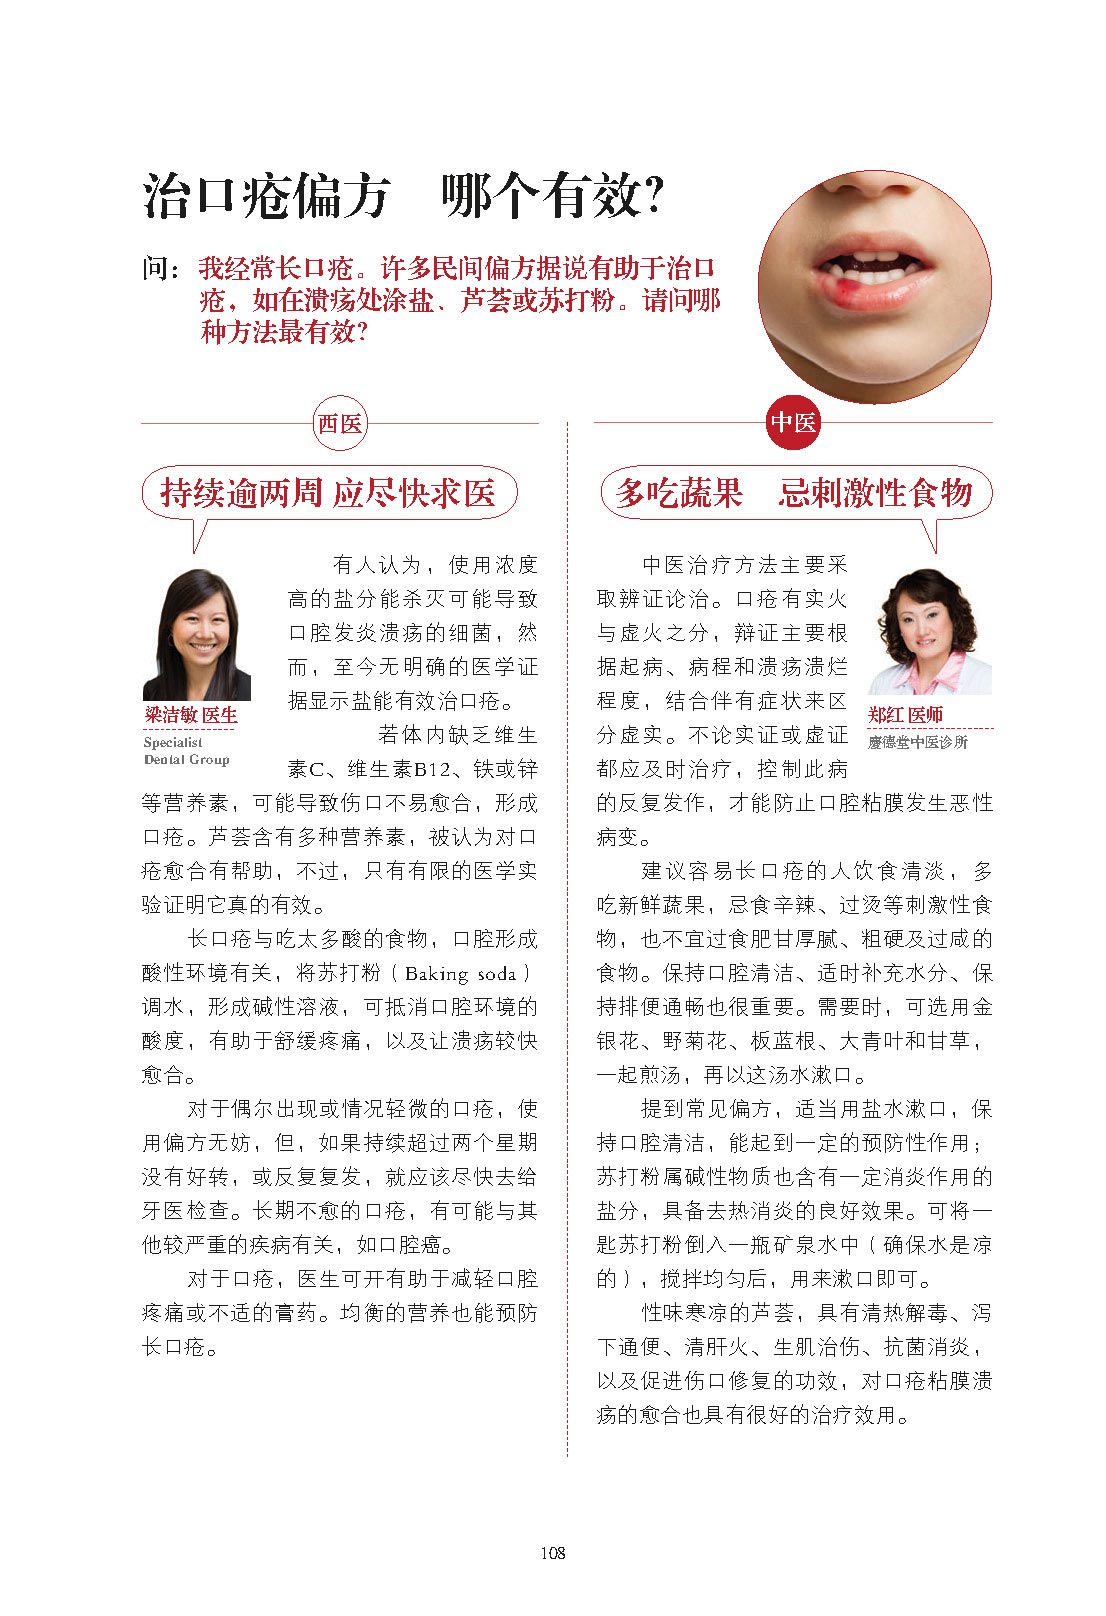 Health No.1, March 2015 issue: What are some effective remedies to treat mouth ulcers?